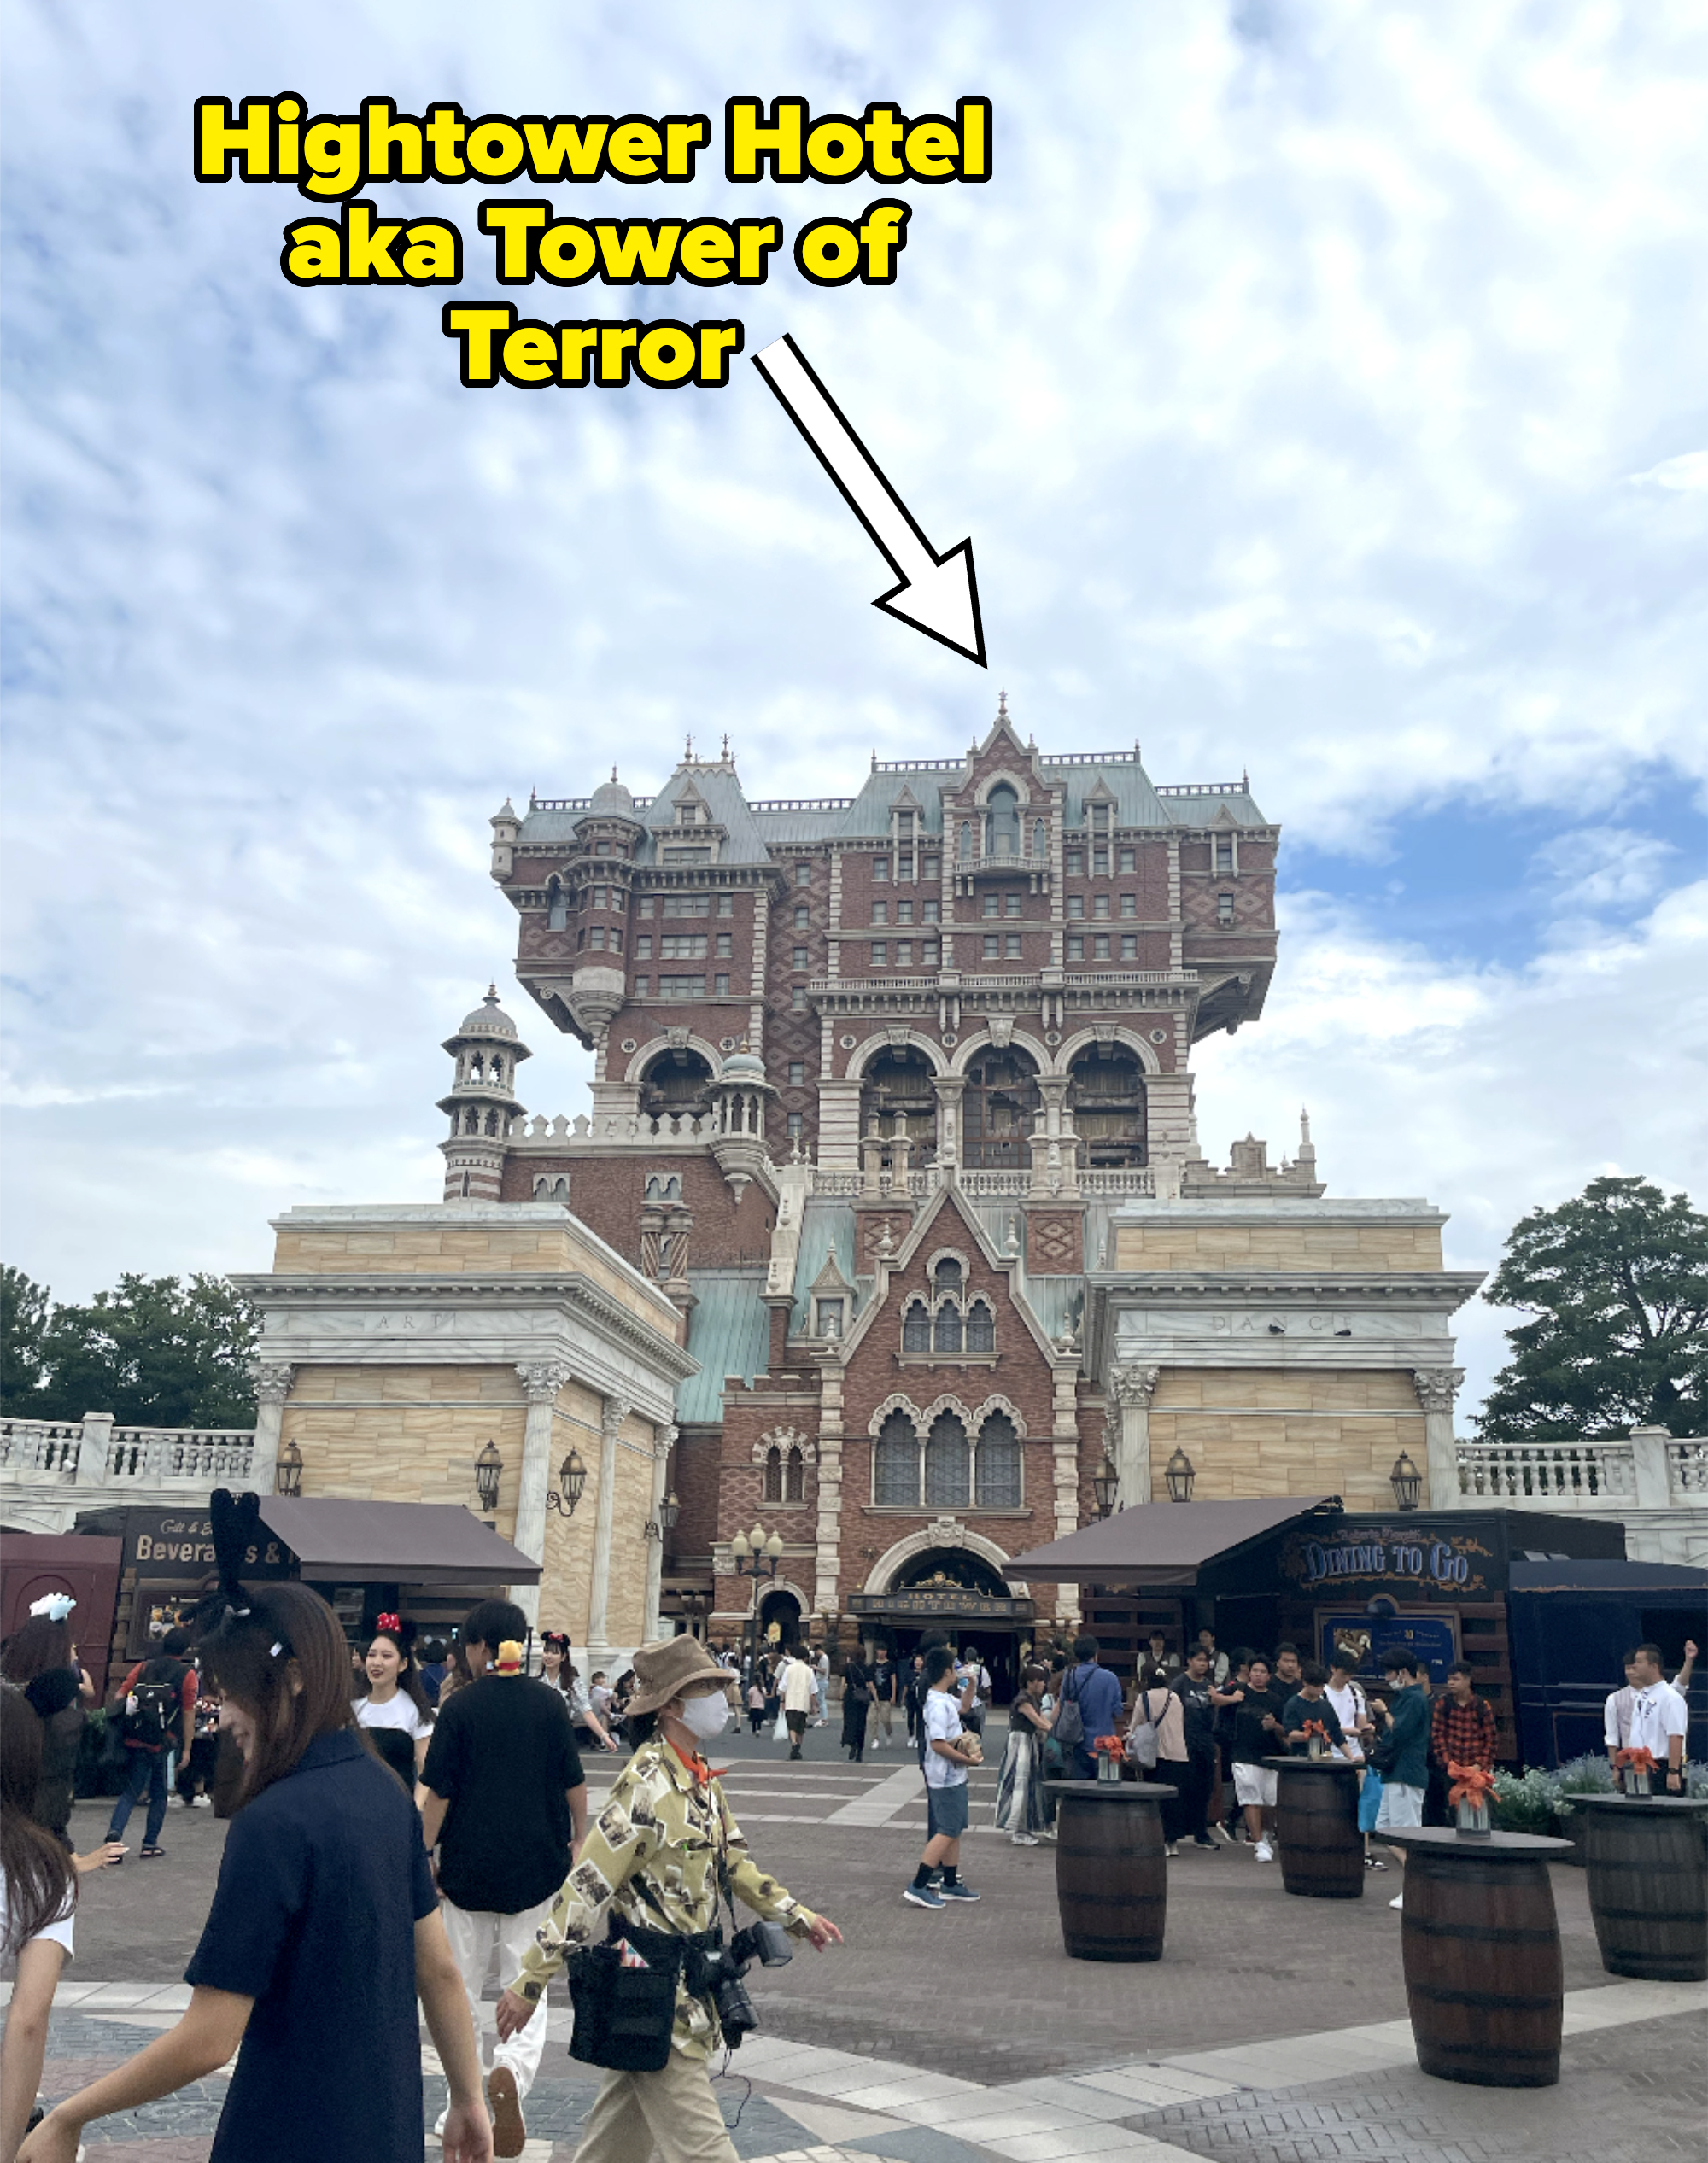 People walk in front of the Tower of Terror attraction at Tokyo DisneySea, surrounded by various booths and shops